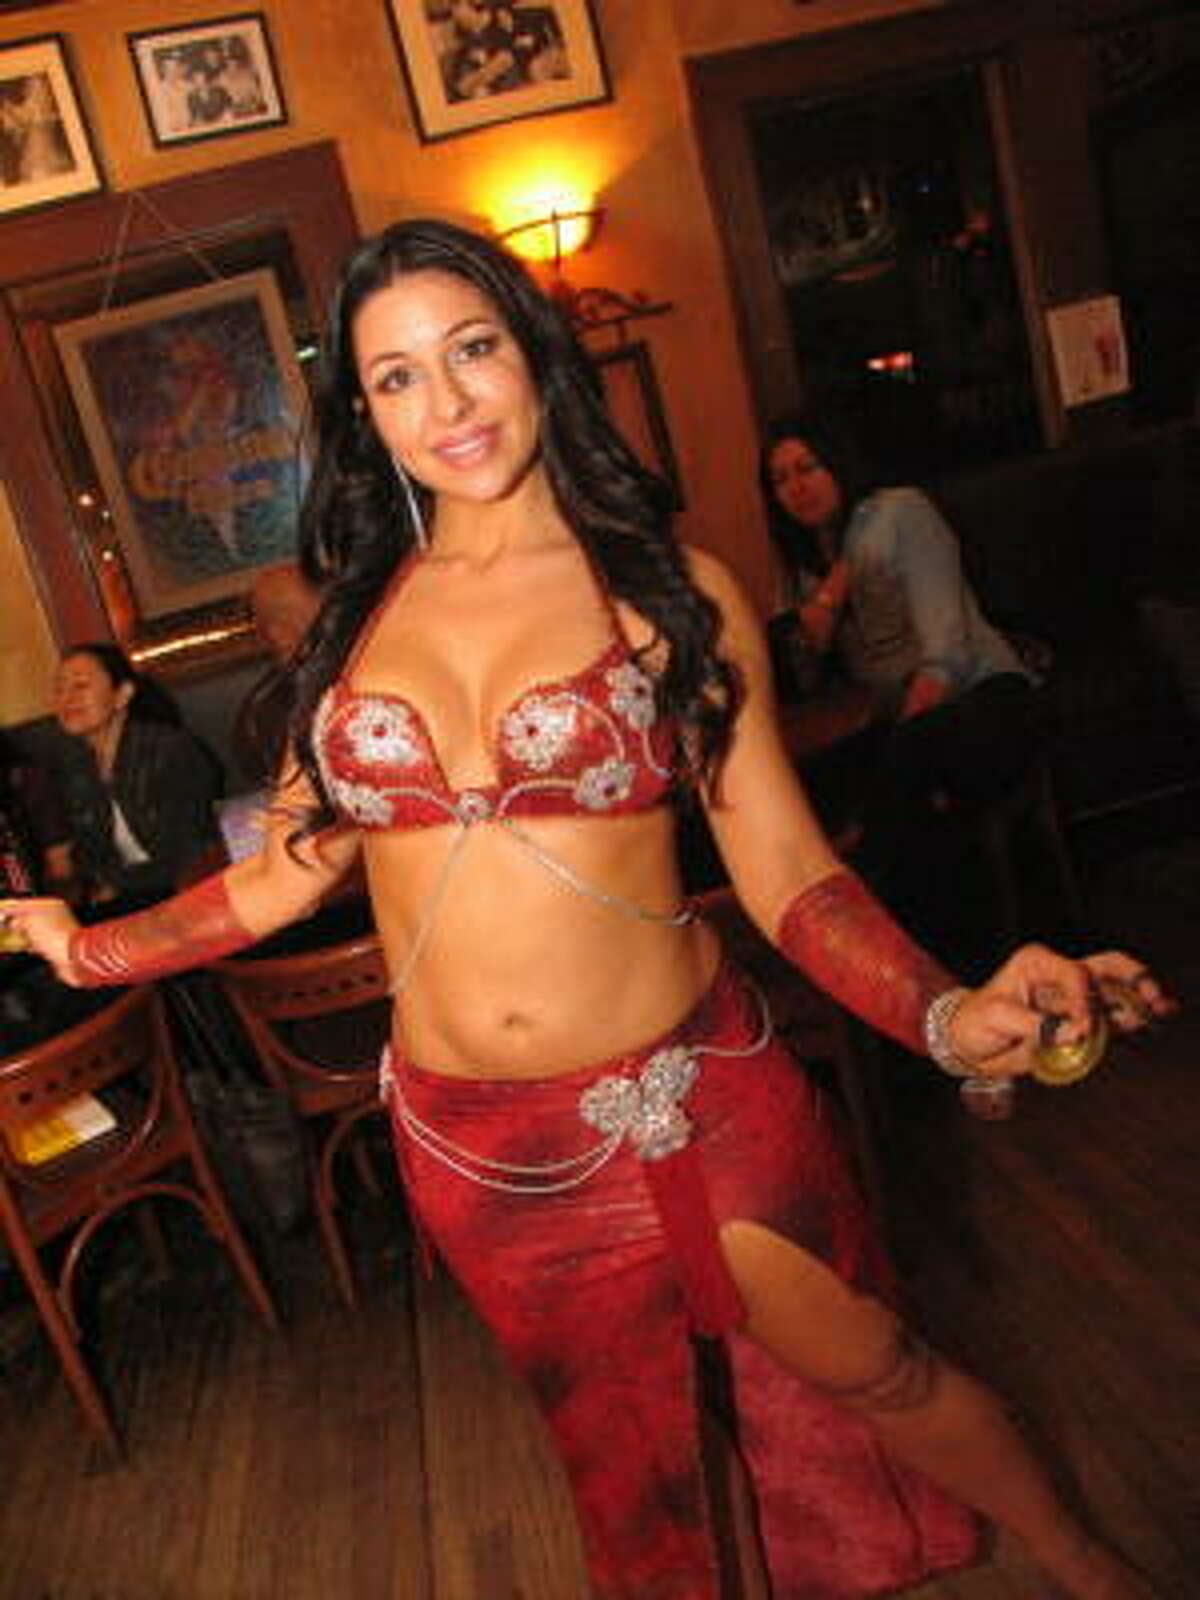 Byzantio is a popular Greek cafe by day and a bar featuring belly dancing and hookah at night. Pictured: Nicole H.